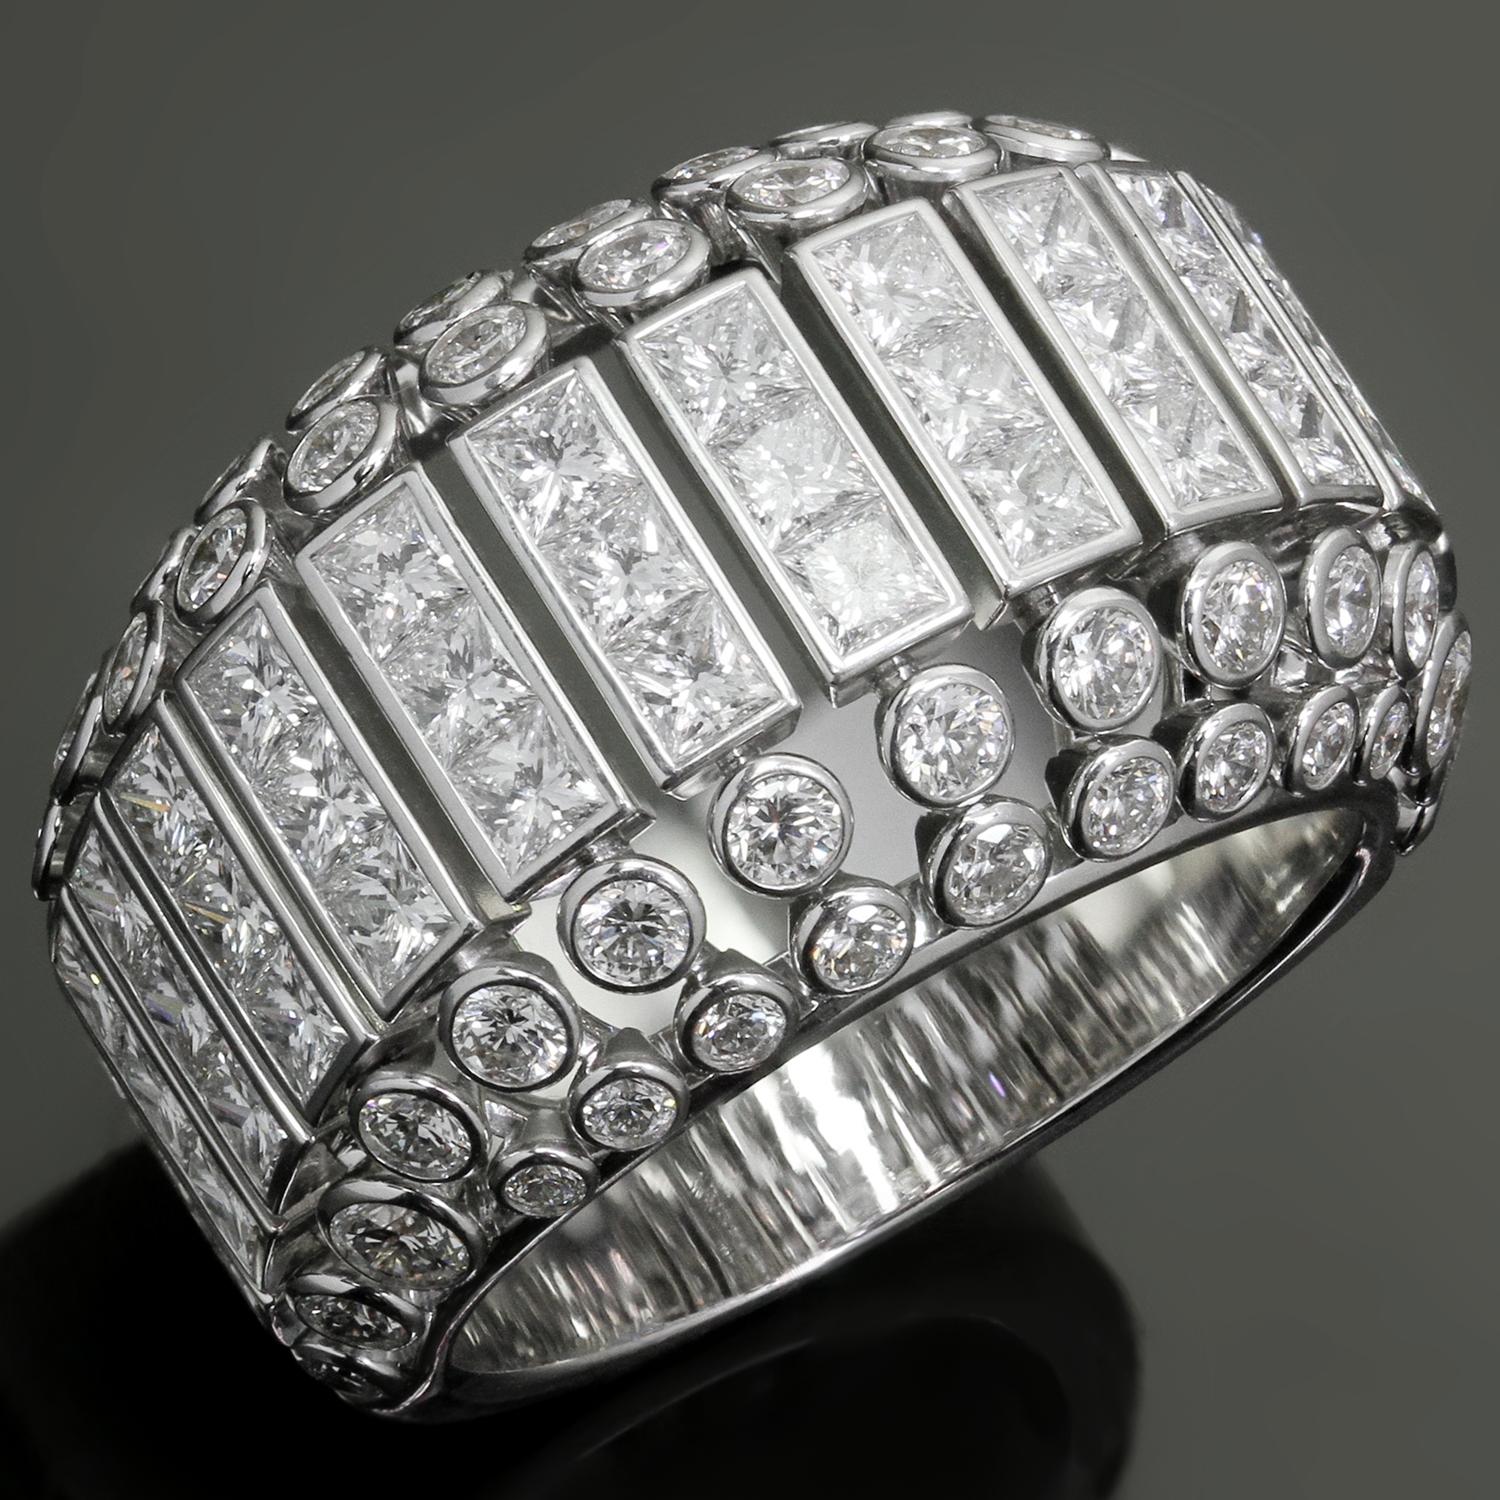 This magnificent Cartier ring features a gorgeous domed design crafted in 18k white gold and and set with round brillant-cut and princess-cut D-F VVS1-VVS2 diamonds weighing an estimated 5.0 carats. Made in France. Measurements: 0.59